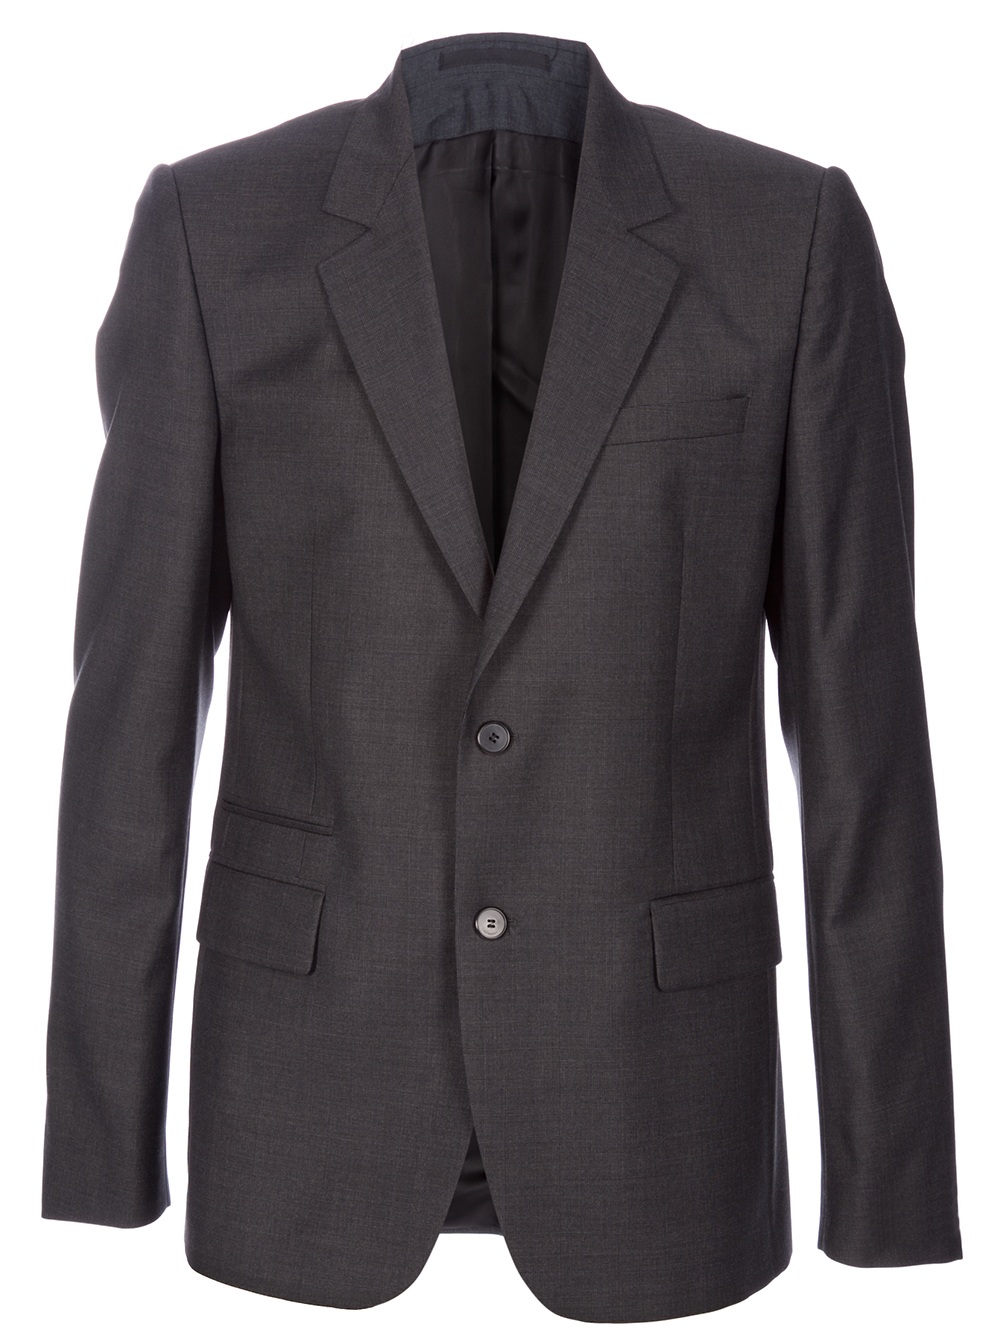 Lyst - Givenchy Suit Blazer in Gray for Men